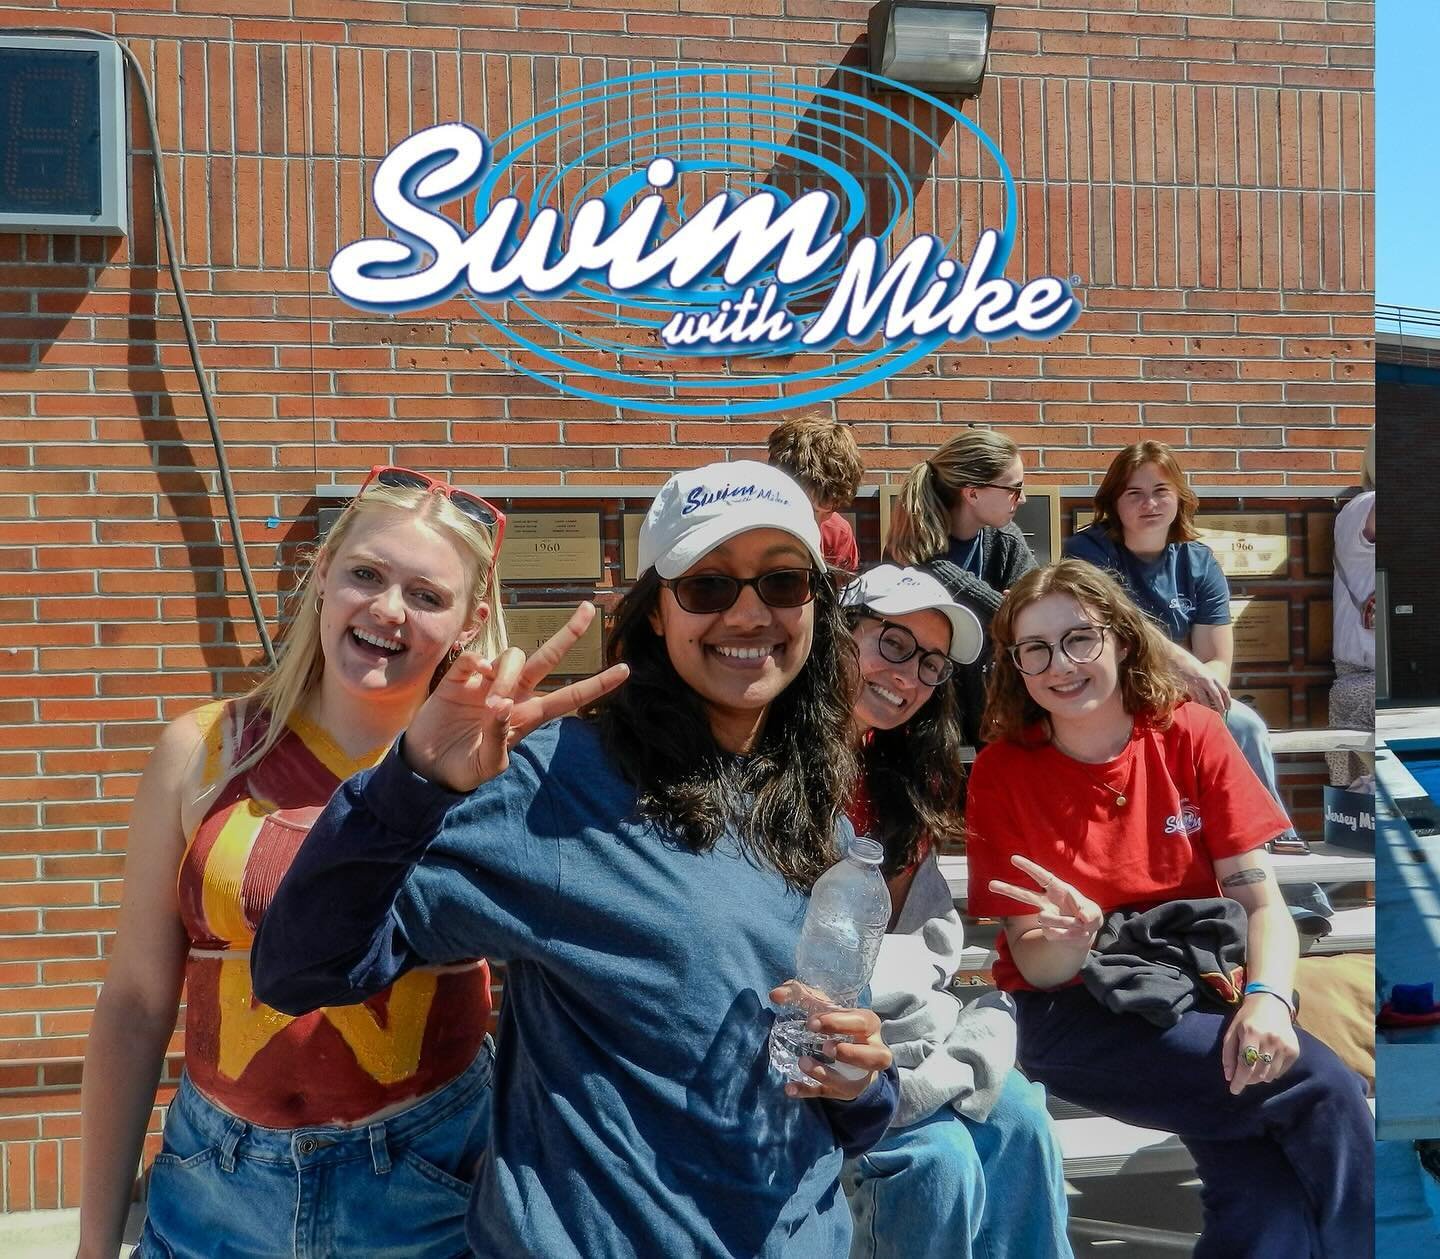 Highlights from another great year at the 43rd annual Swim with Mike!

Trojan Knights is honored and thankful to participate in volunteering to help physically challenged students continue their education and achieve their academic aspirations